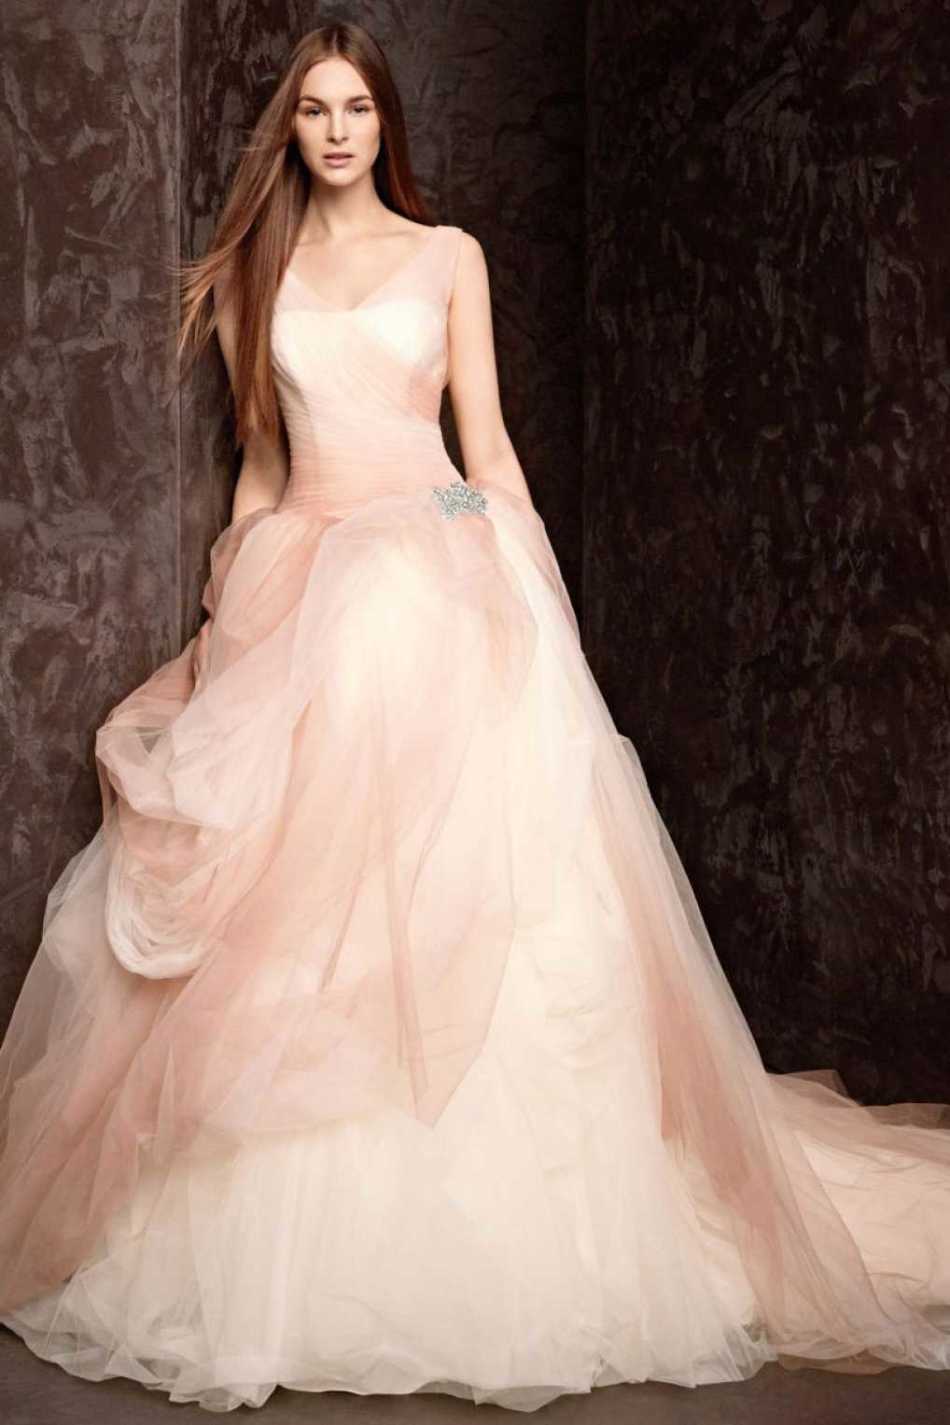 Dress with pink, soft shade